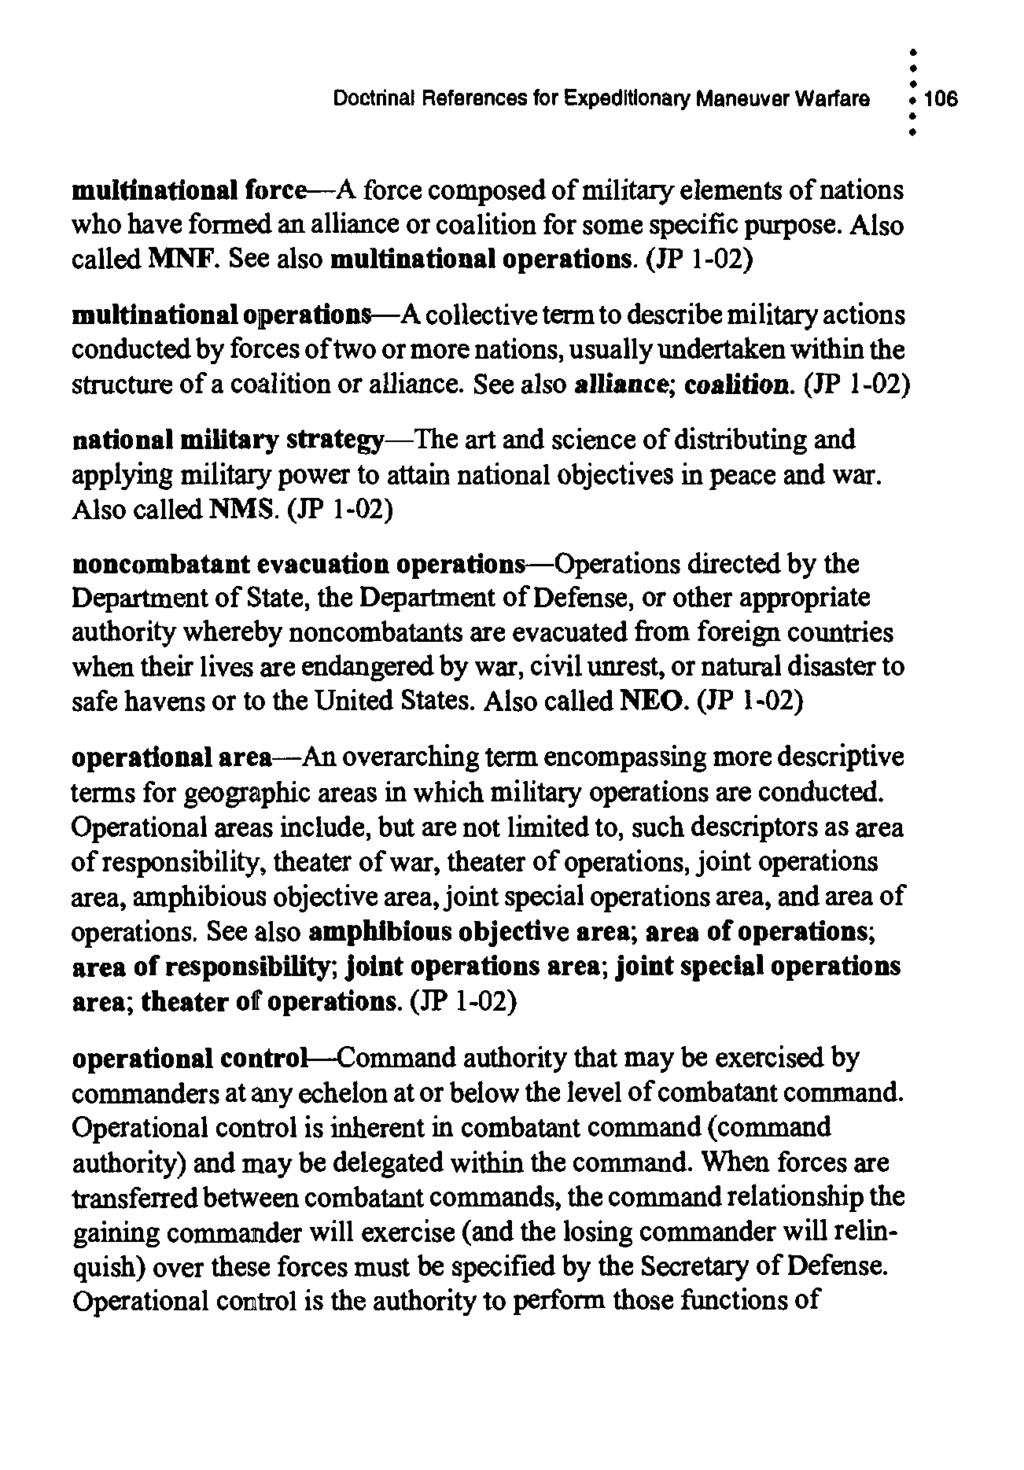 Doctnnal References for Expeditionary Maneuver Warfare :106. multinational force A force composed of military elements of nations who have formed an alliance or coalition for some specific purpose.